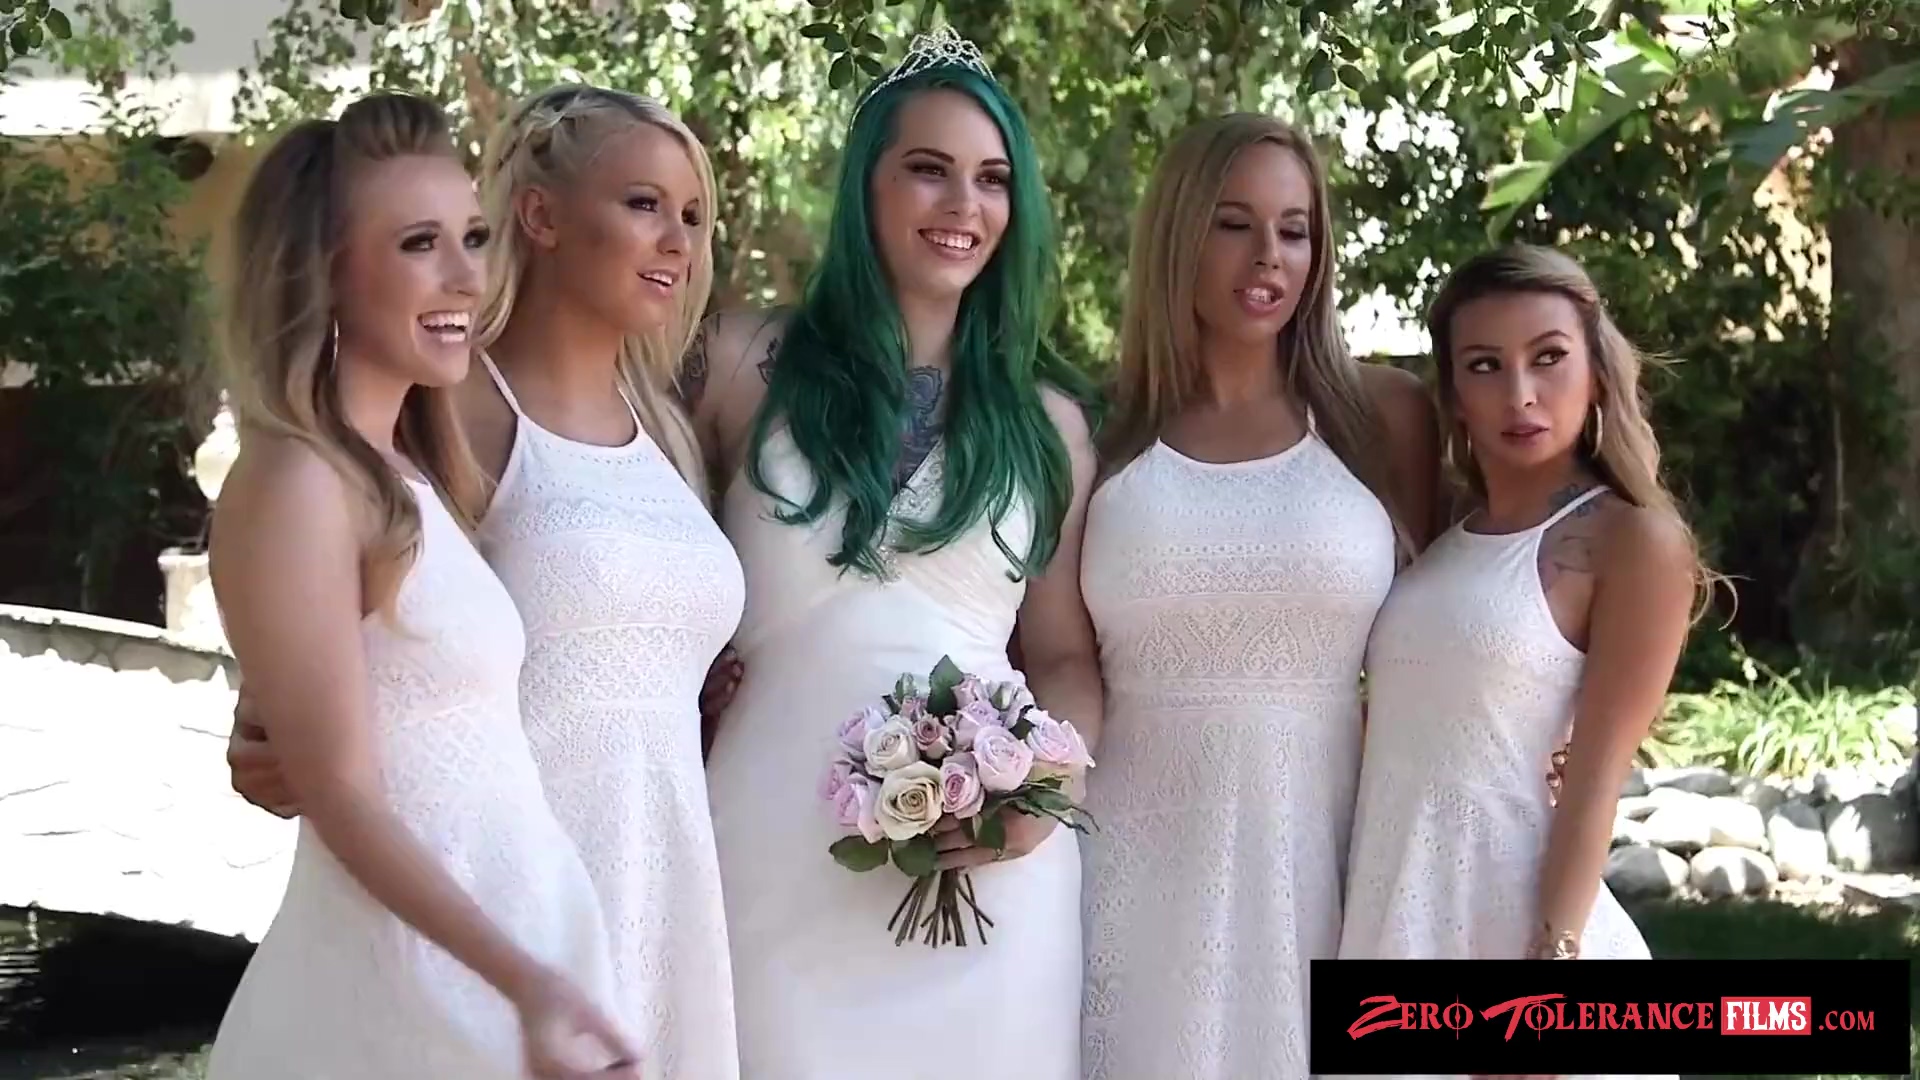 Real wedding orgy of perverted bride, groom and their friends image